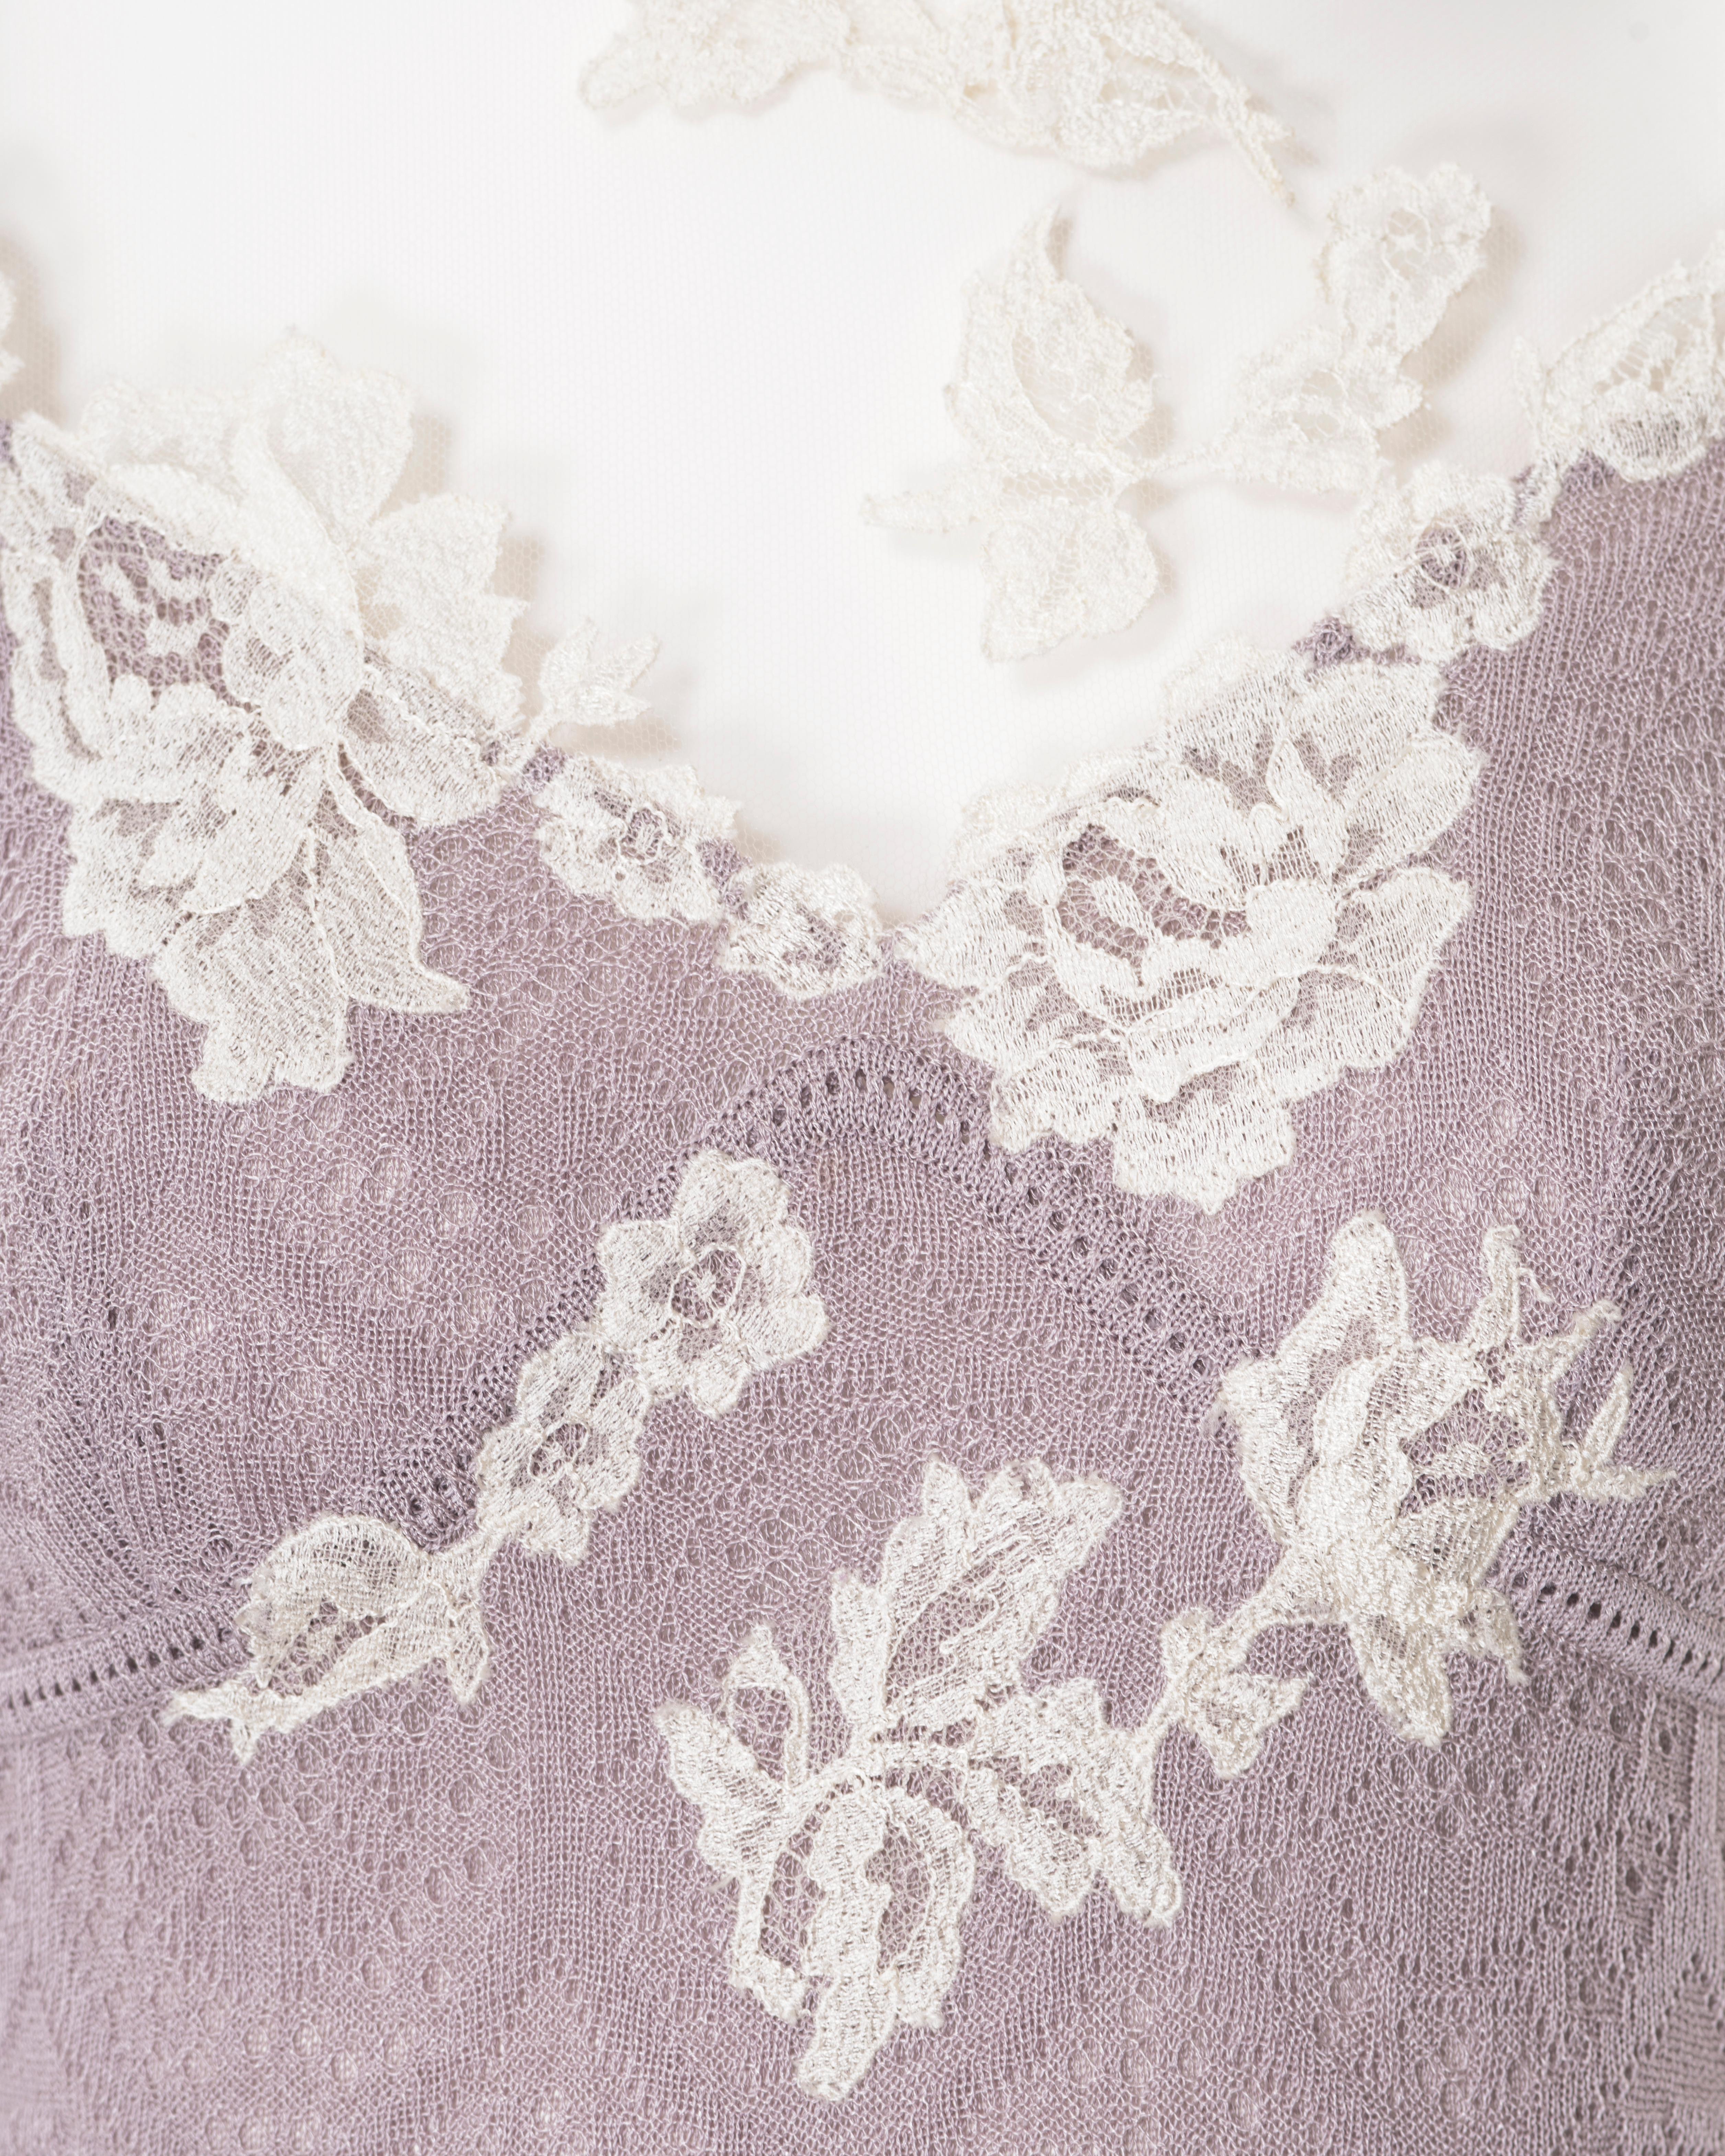 Women's John Galliano lilac knitted lace dress with cream lace and mesh, ss 1998 For Sale